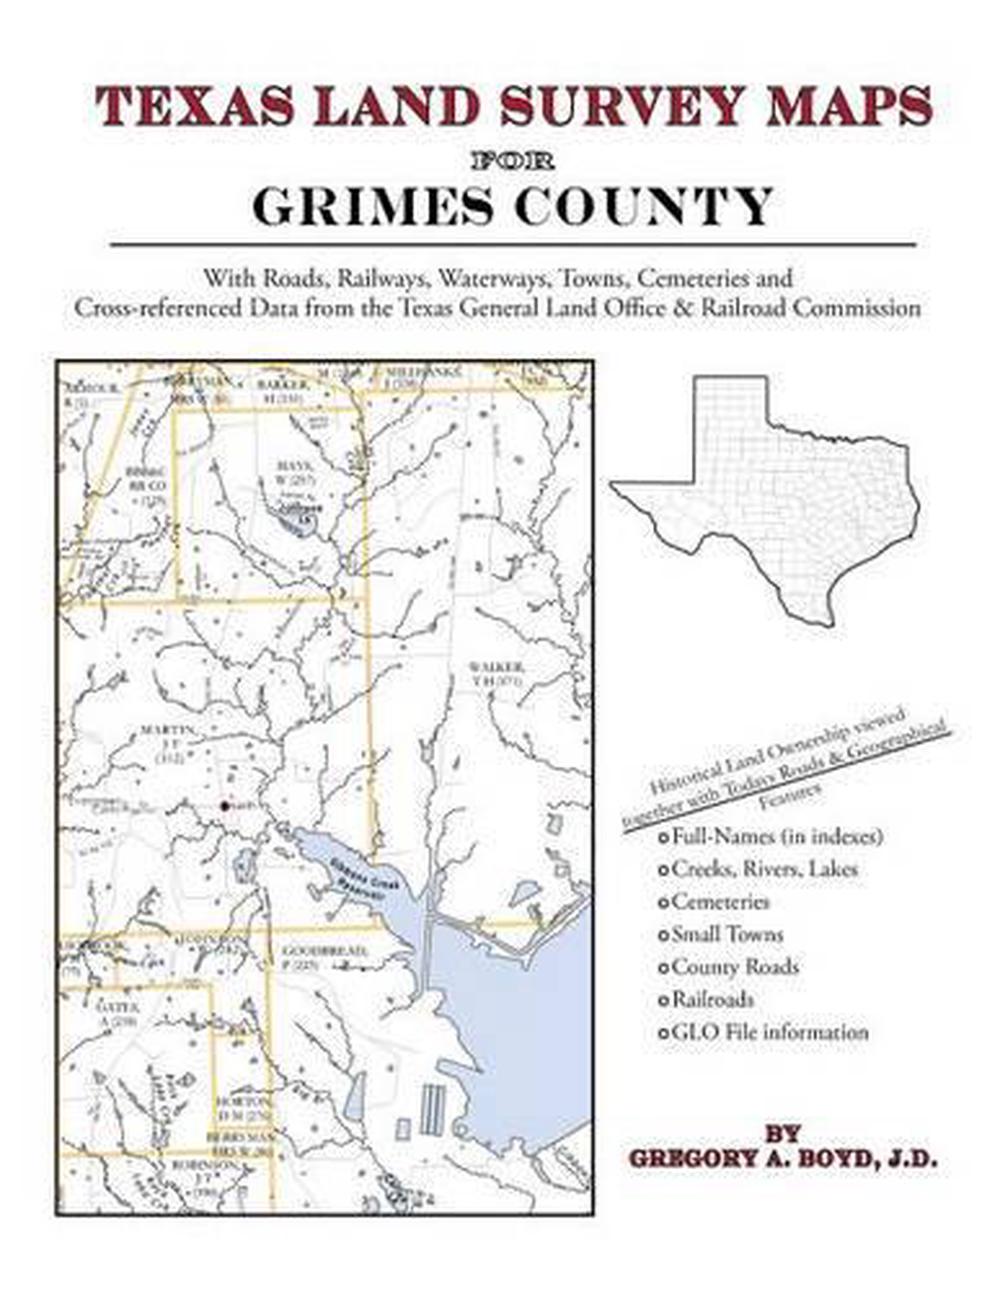 Texas Land Survey Maps For Grimes County With Roads Railways